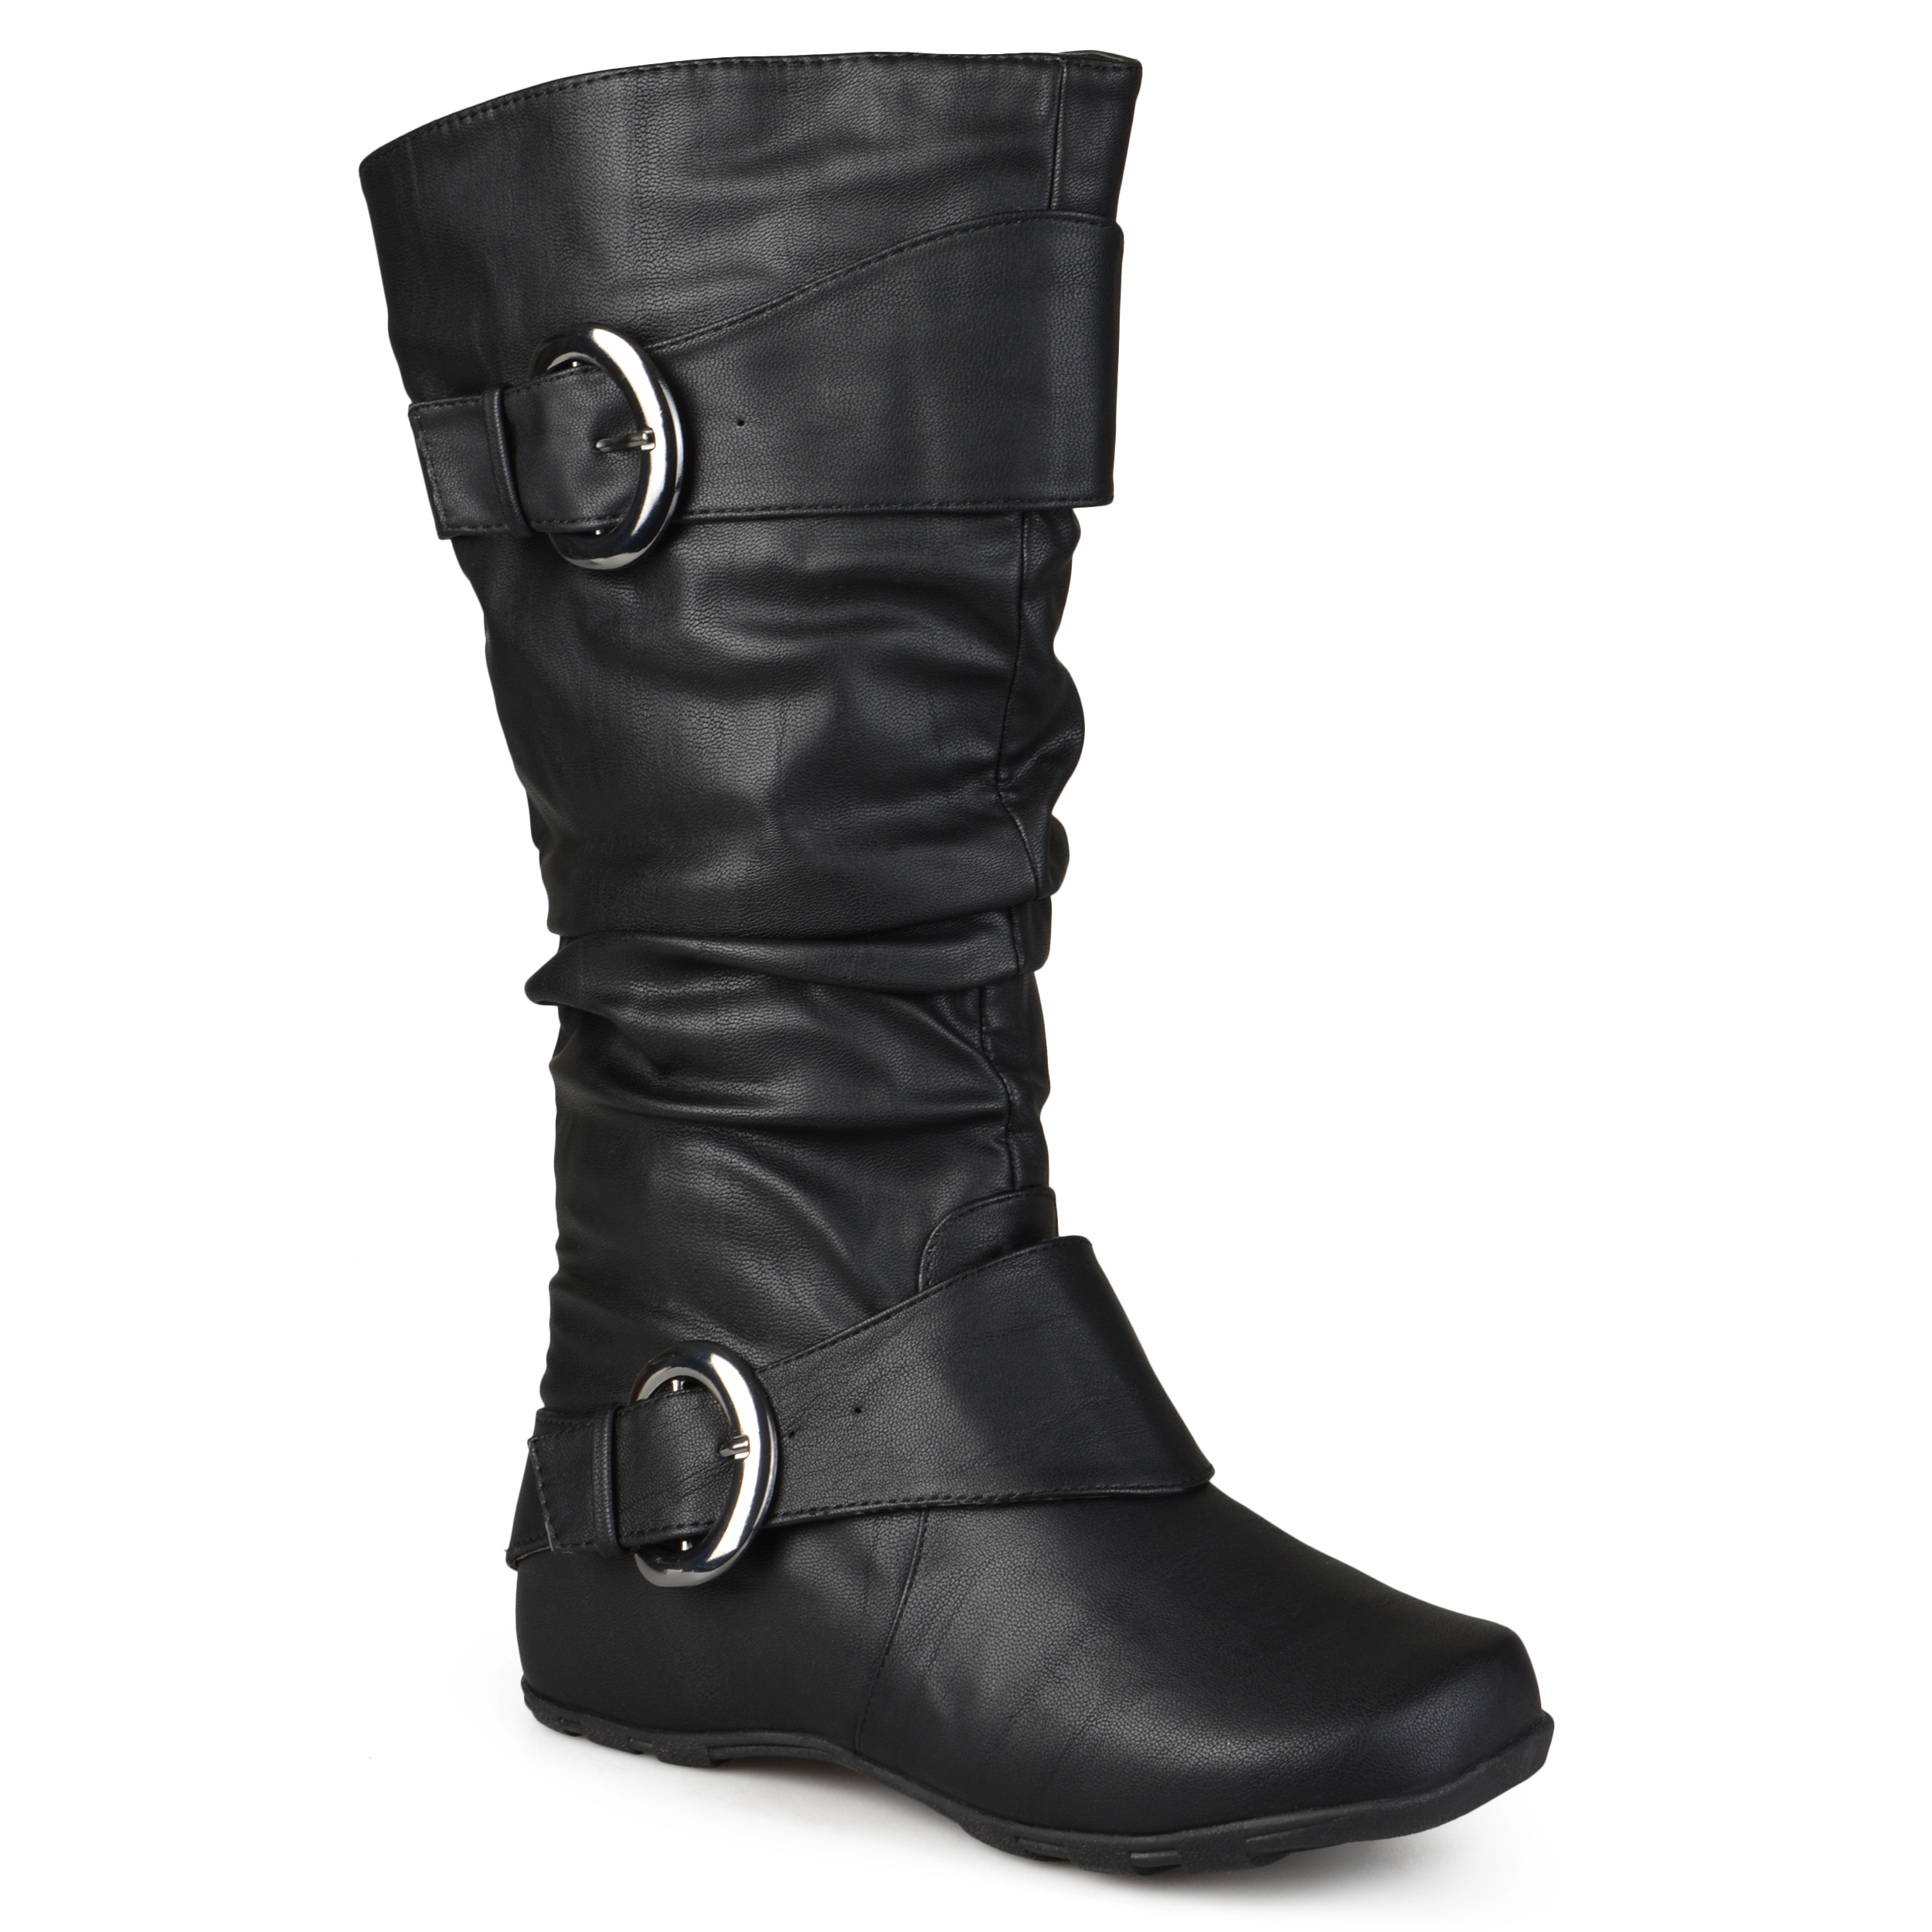 Journee Collection Womens Wide Calf Slouchy Buckle Detail Boots | eBay